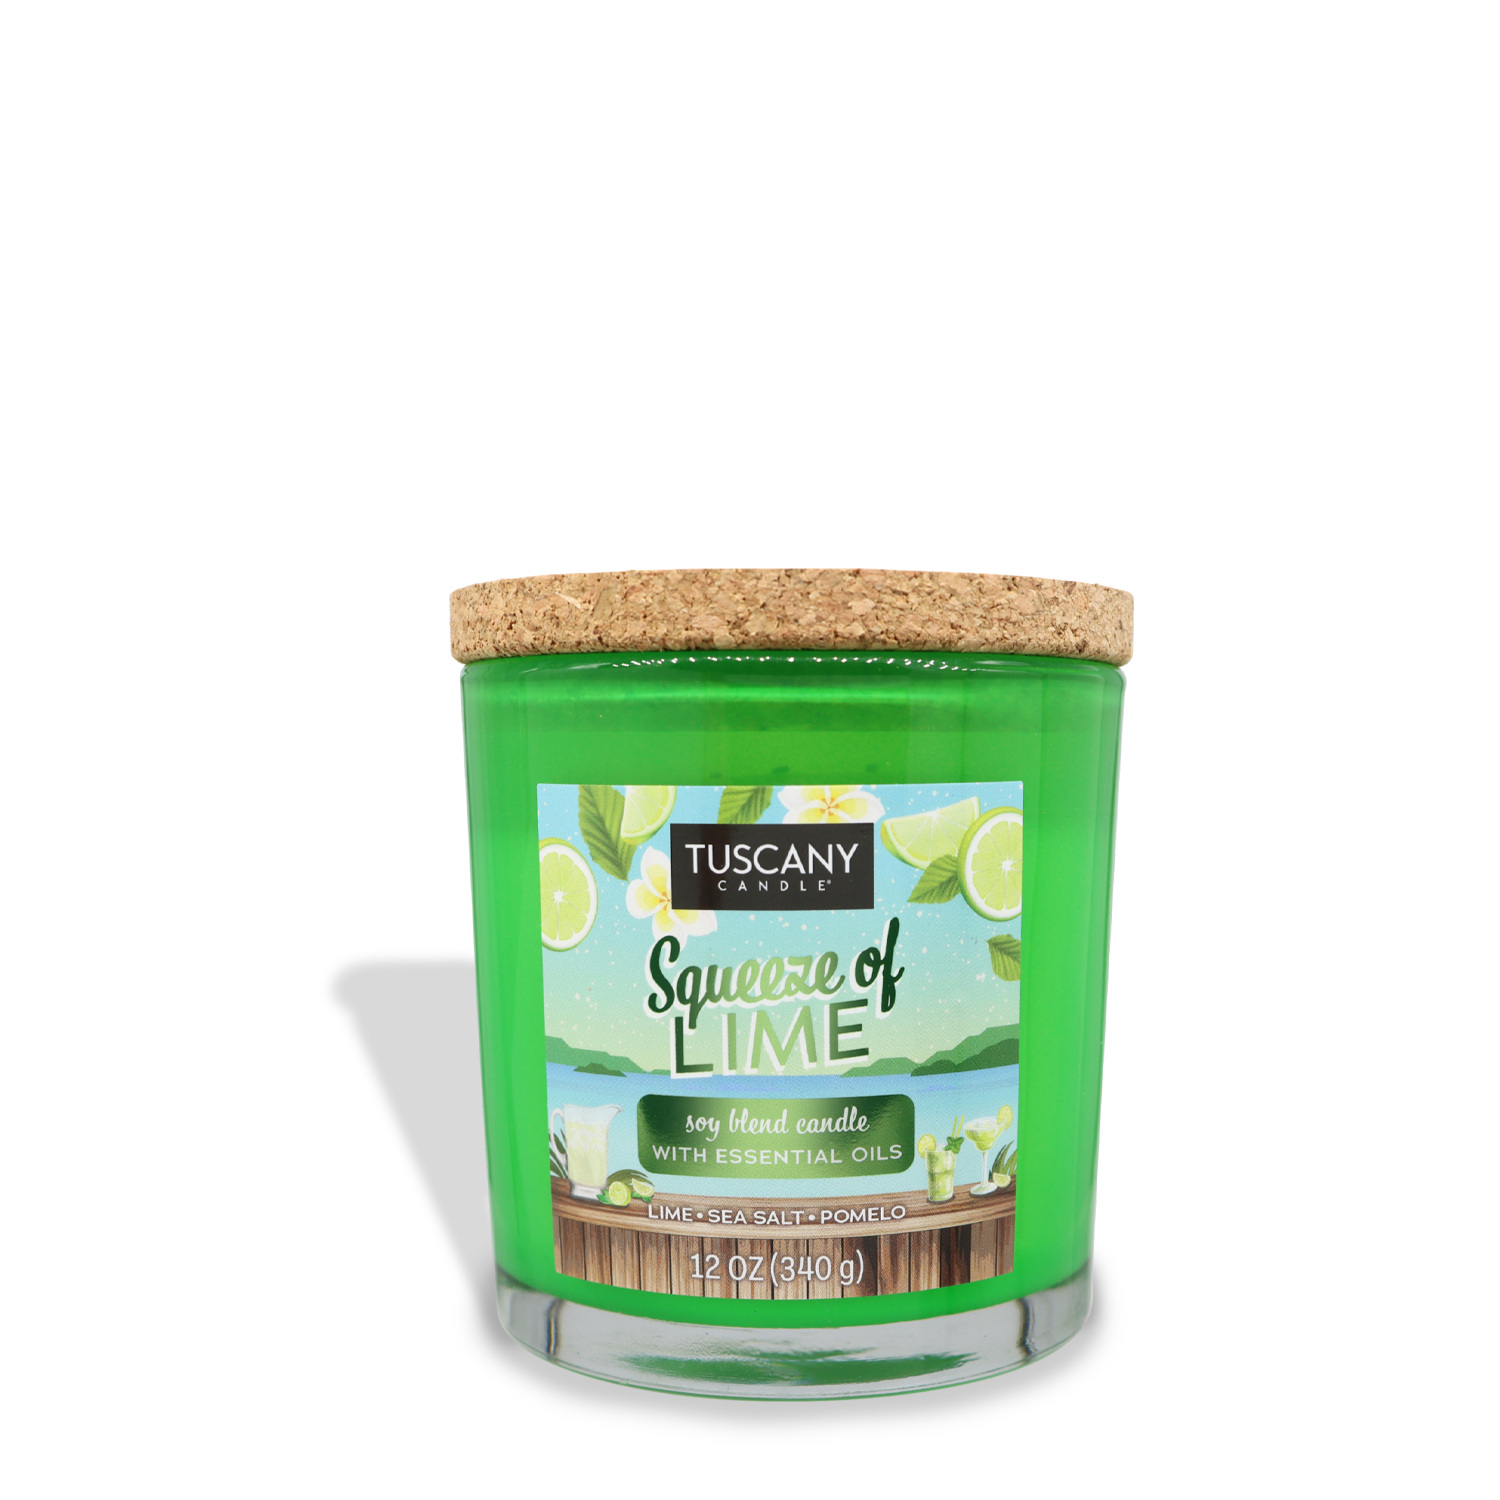 A green Tuscany Candle® SEASONAL with a cork lid, labeled "Squeeze of Lime (12 oz) – Sunset Beach Bar Collection," 12 oz (340g), containing a soy blend candle with essential oils. Experience the citrusy splash of lime and sea-salted pomelo for a refreshing beachside escape.